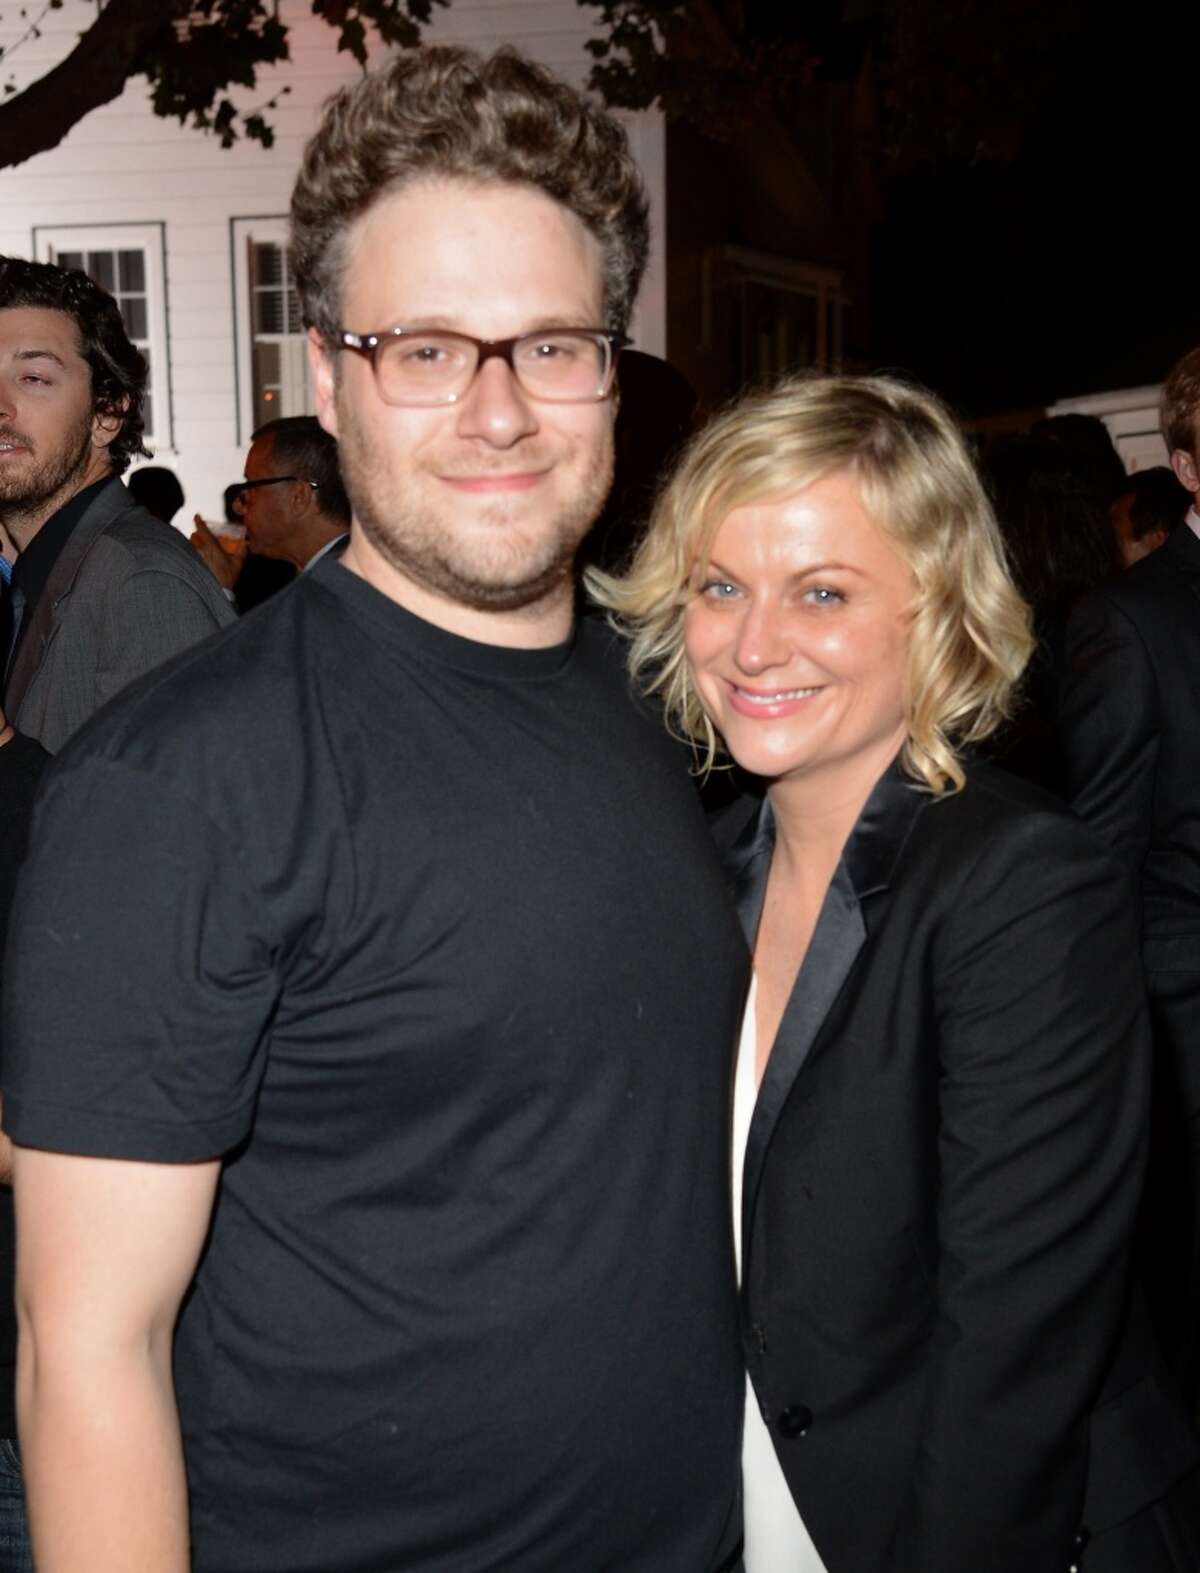 Roast Master Seth Rogen and actress Amy Poehler attend The Comedy Central Roast of James Franco after party at Culver Studios on August 25, 2013 in Culver City, California.